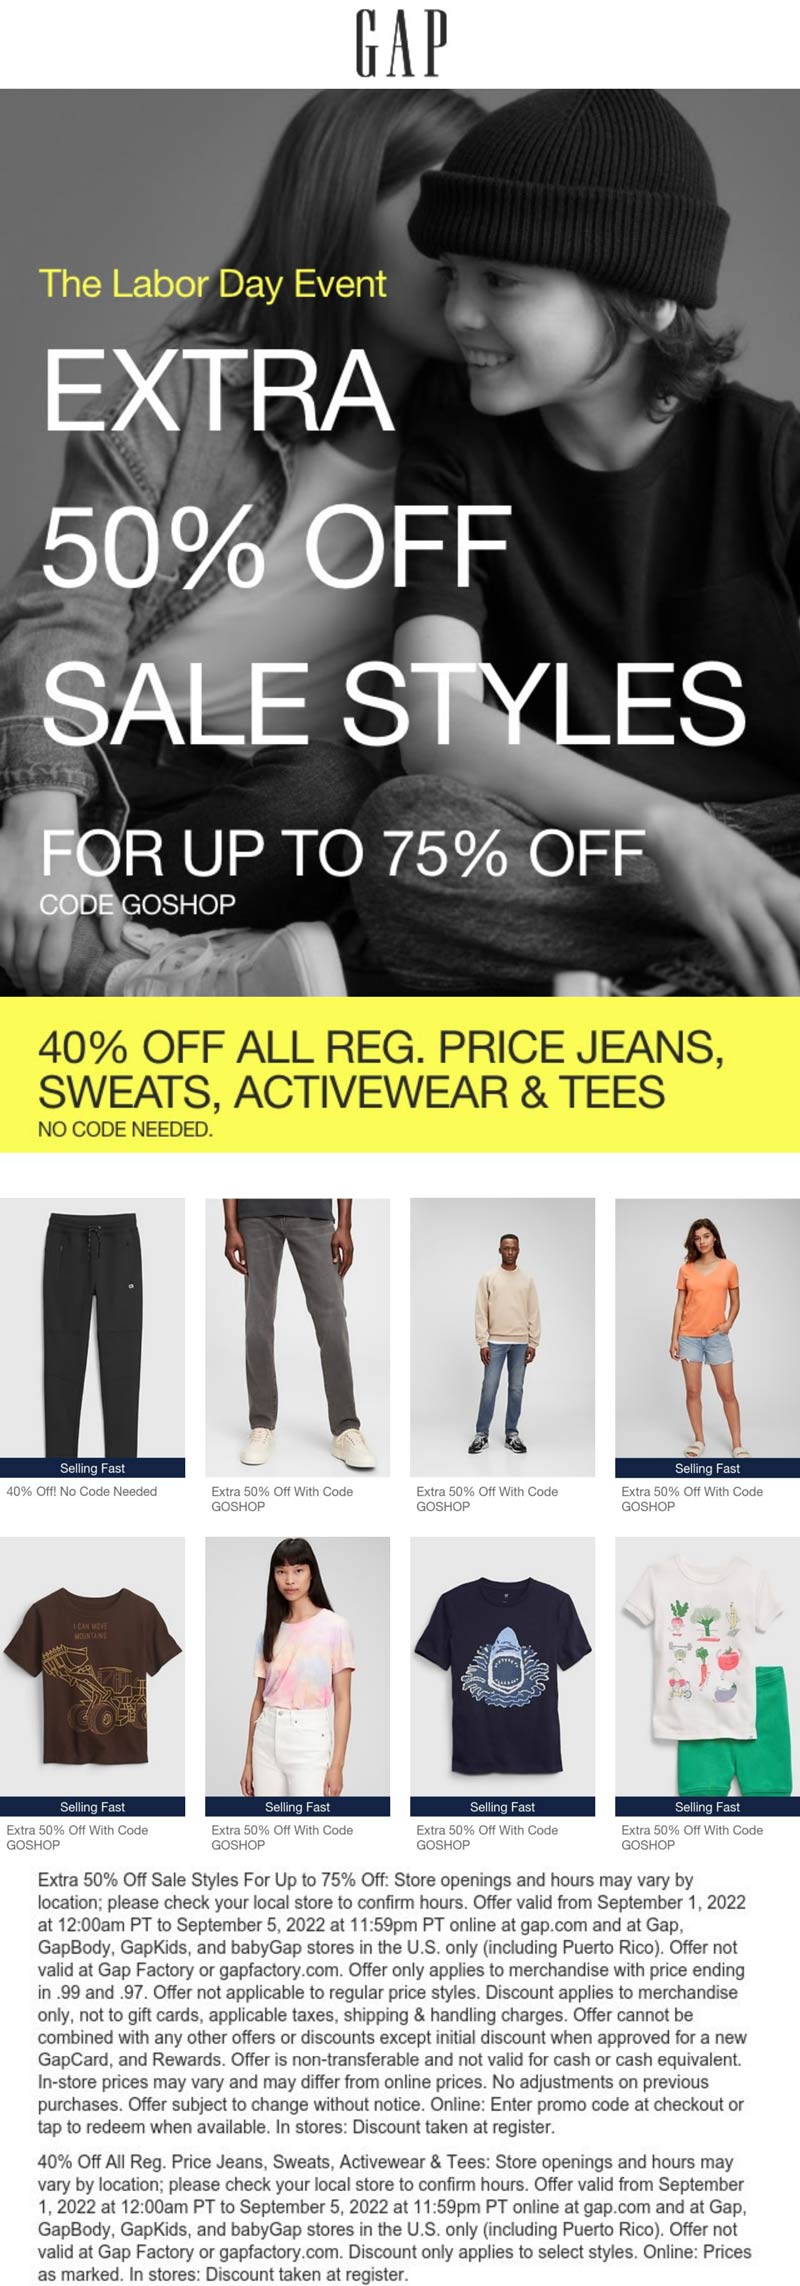 Gap stores Coupon  Extra 50% off sale styles & more at Gap, or online via promo code GOSHOP #gap 